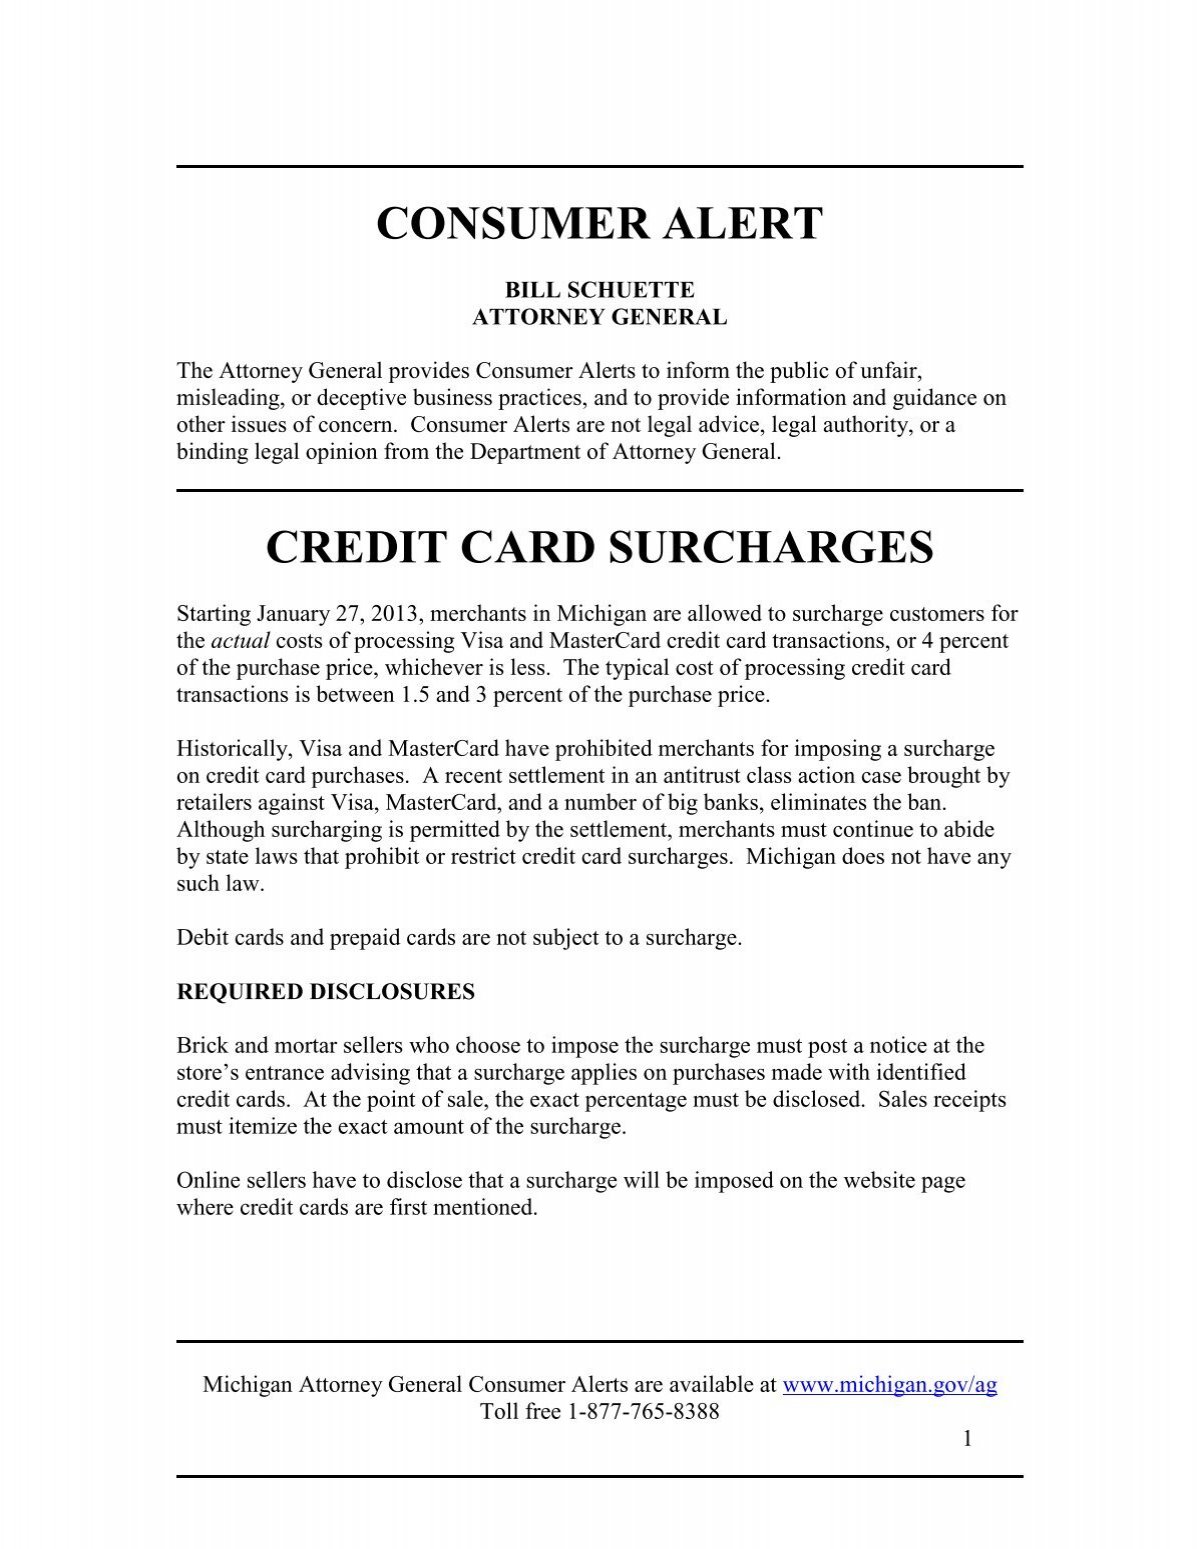 credit-card-surcharges-mlive